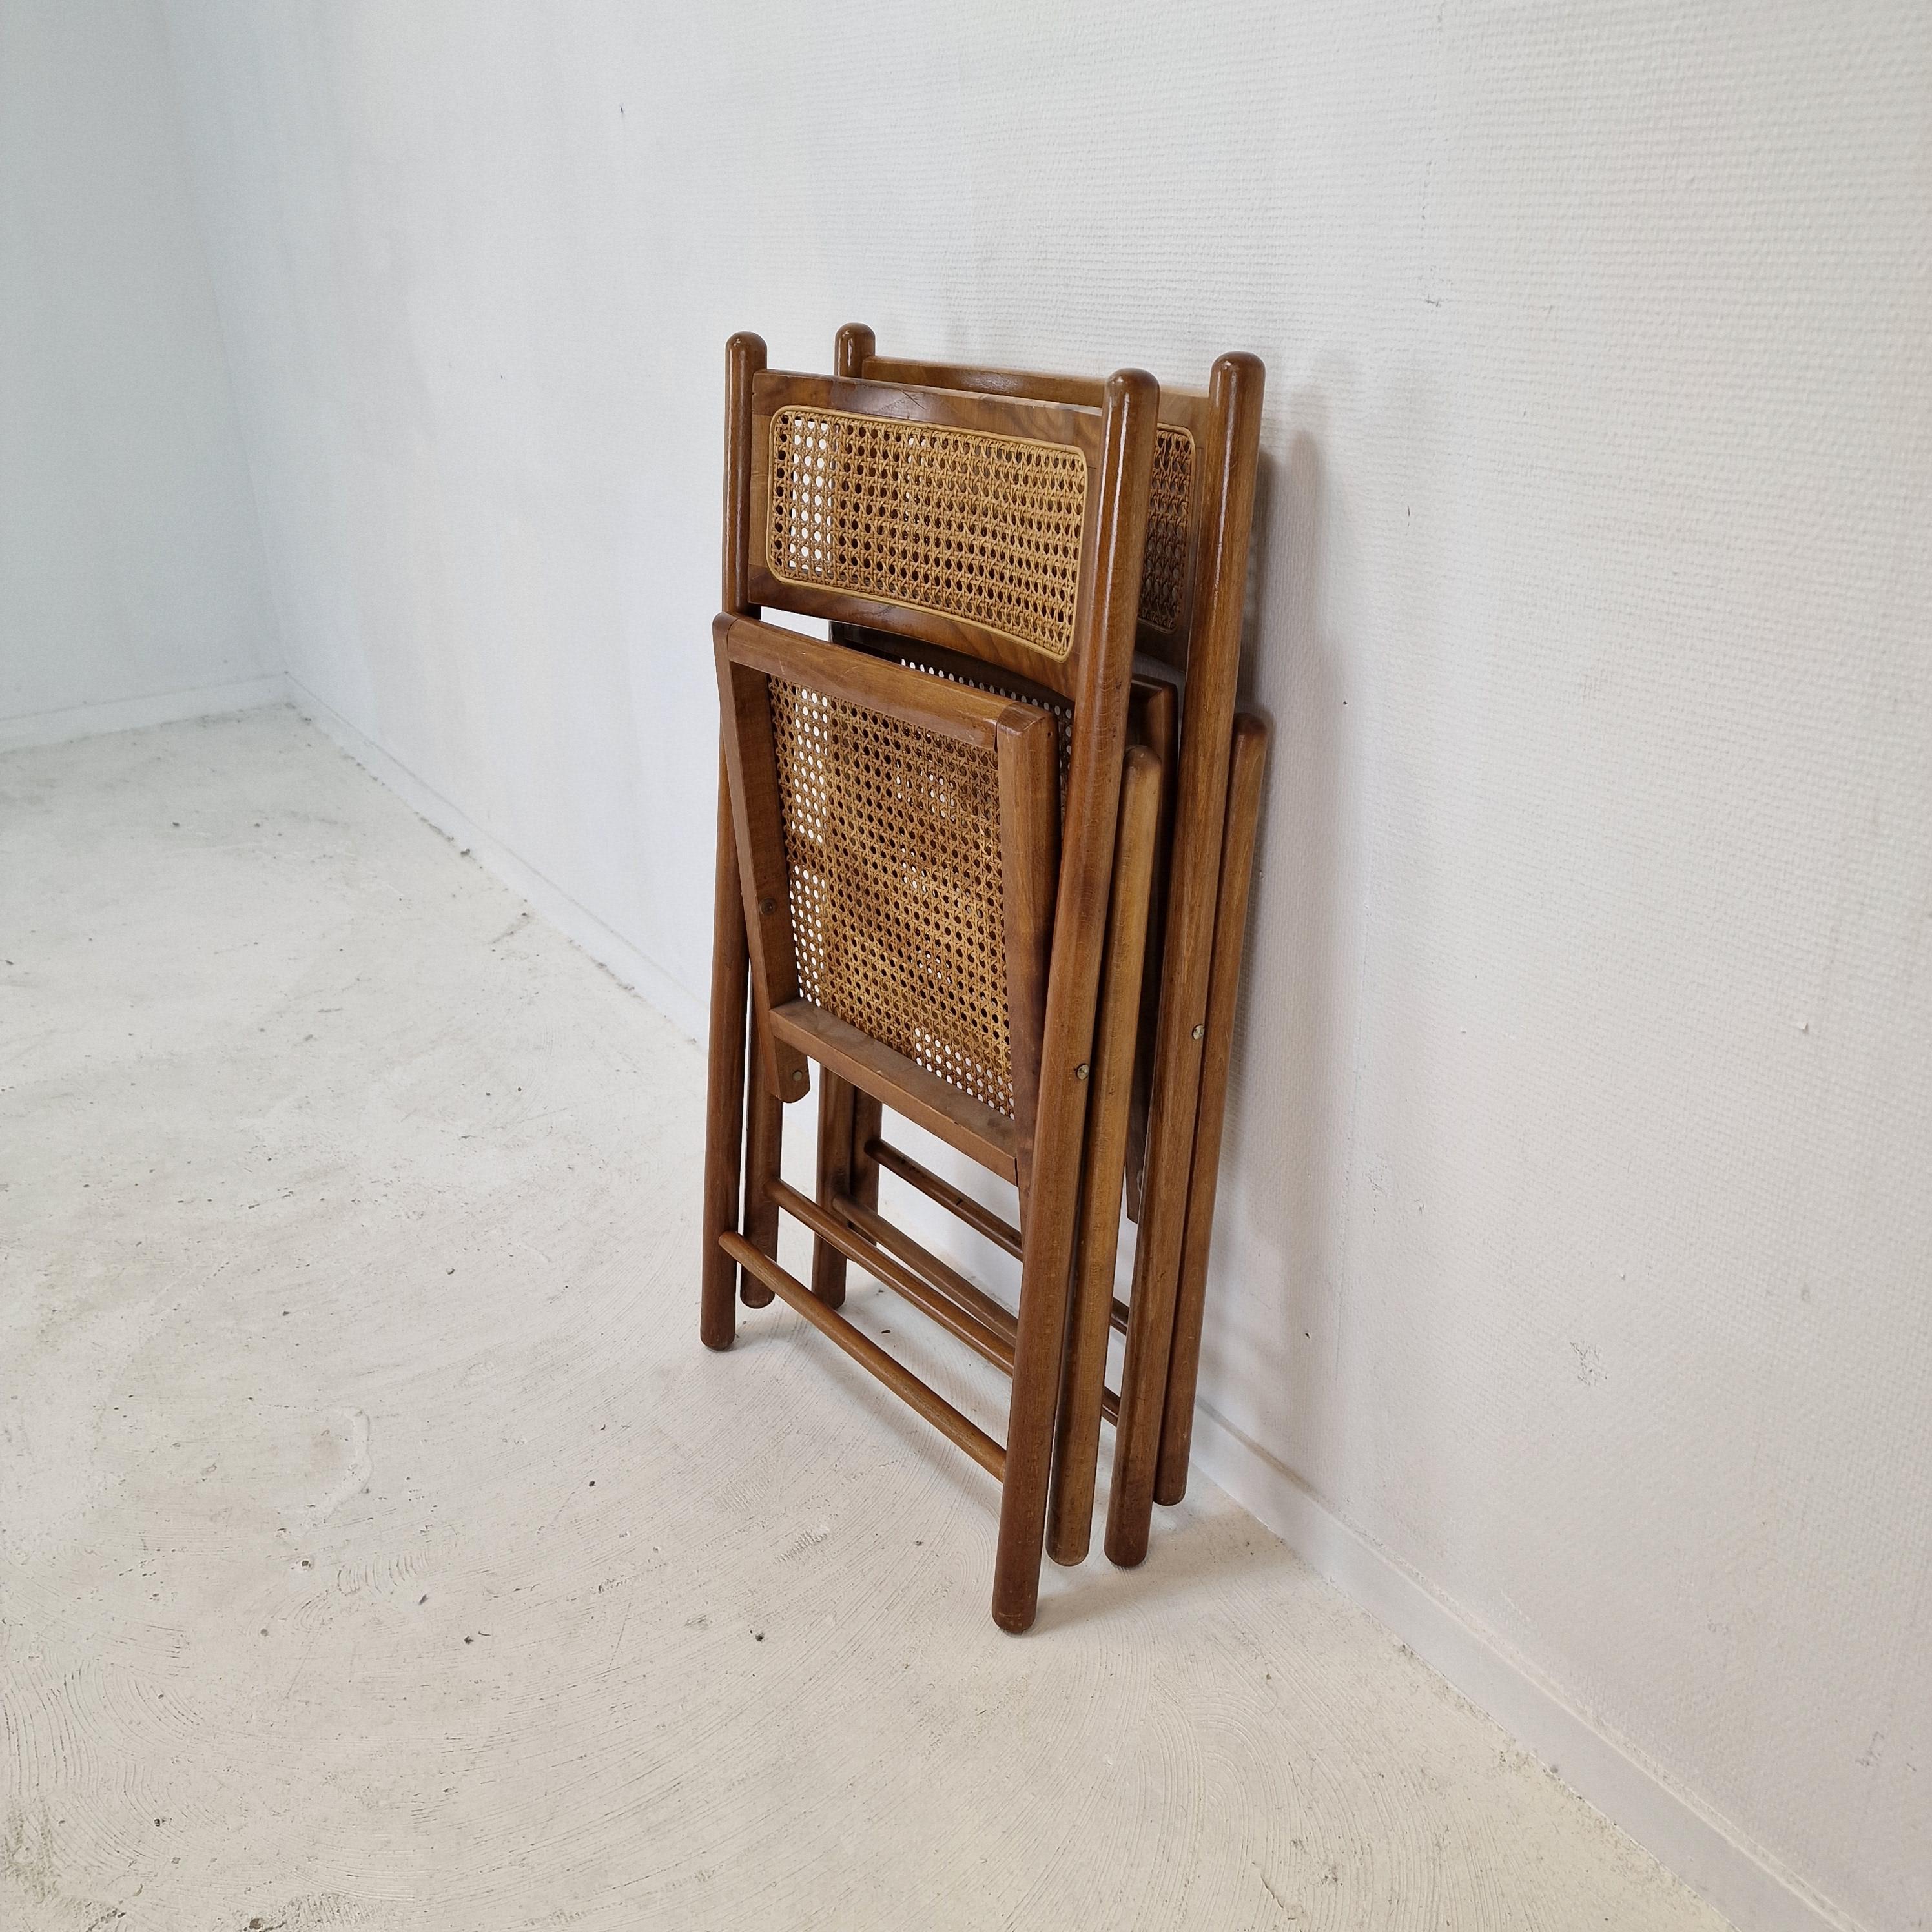 Set of 4 Italian Folding Chairs with Rattan, 1980s For Sale 11